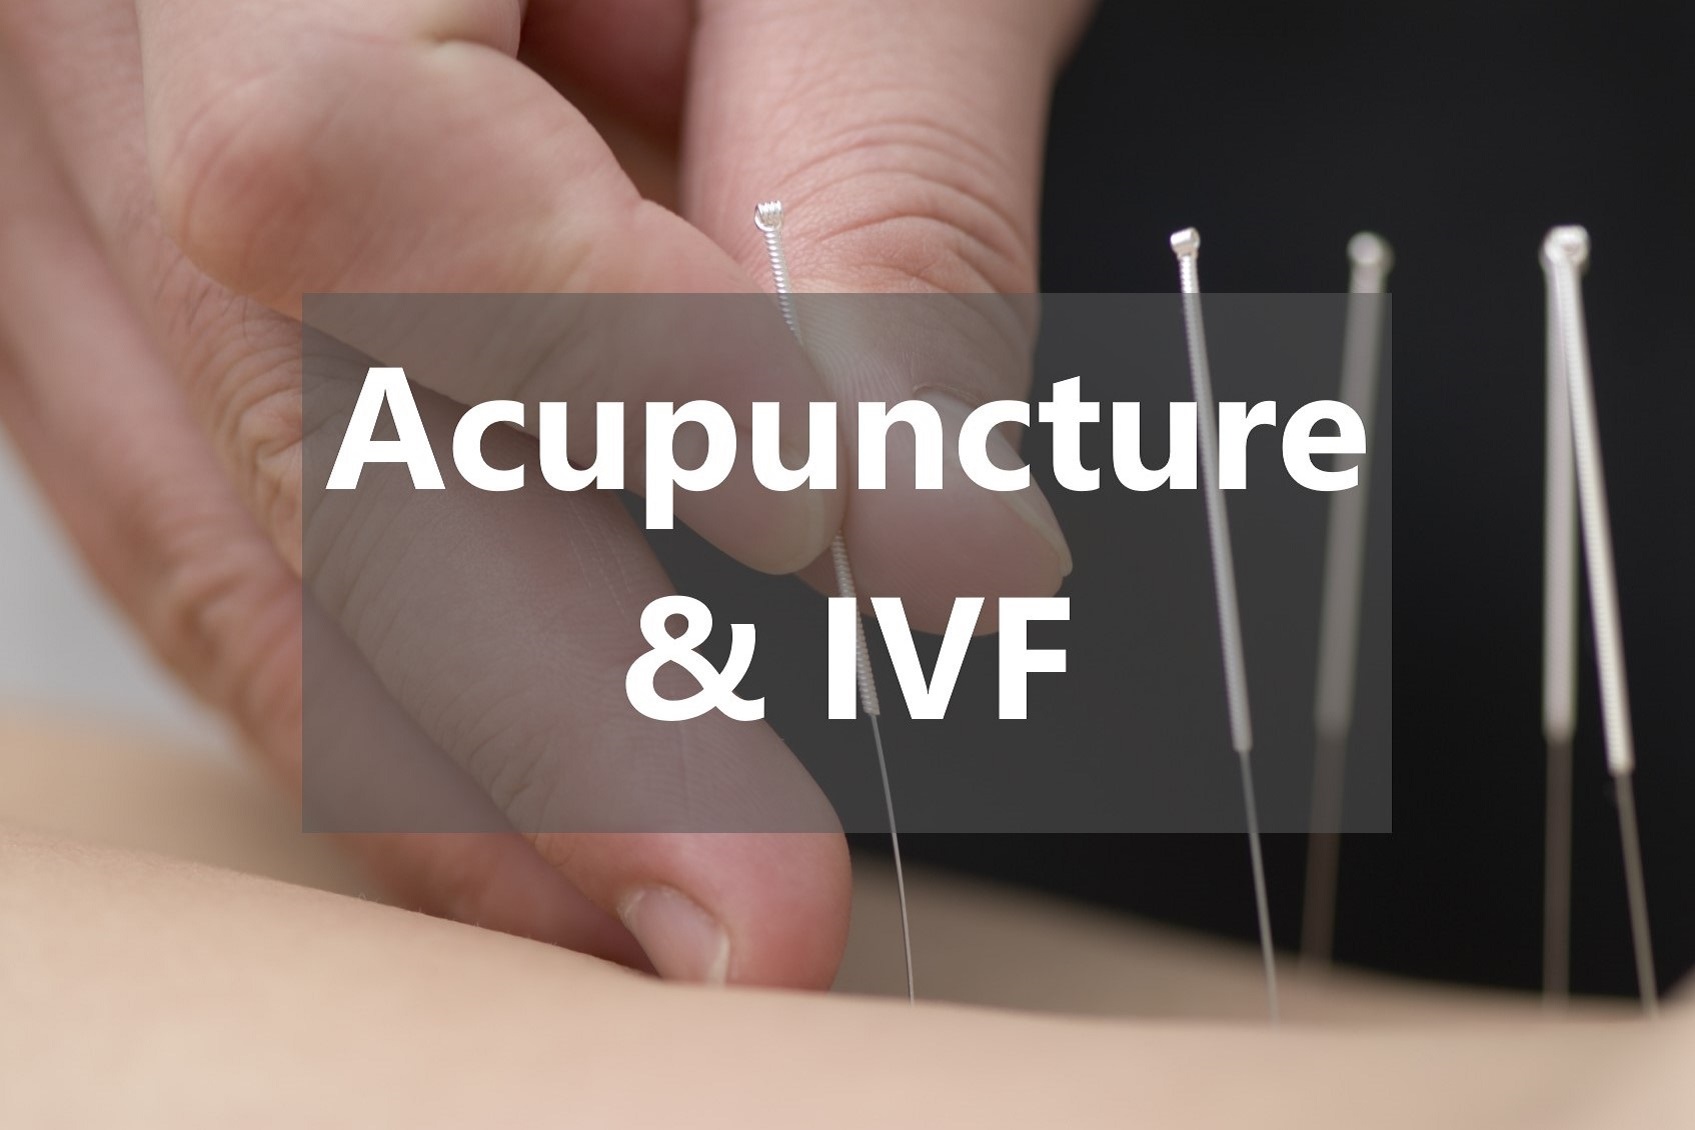 Acupuncture and IVF treatment.